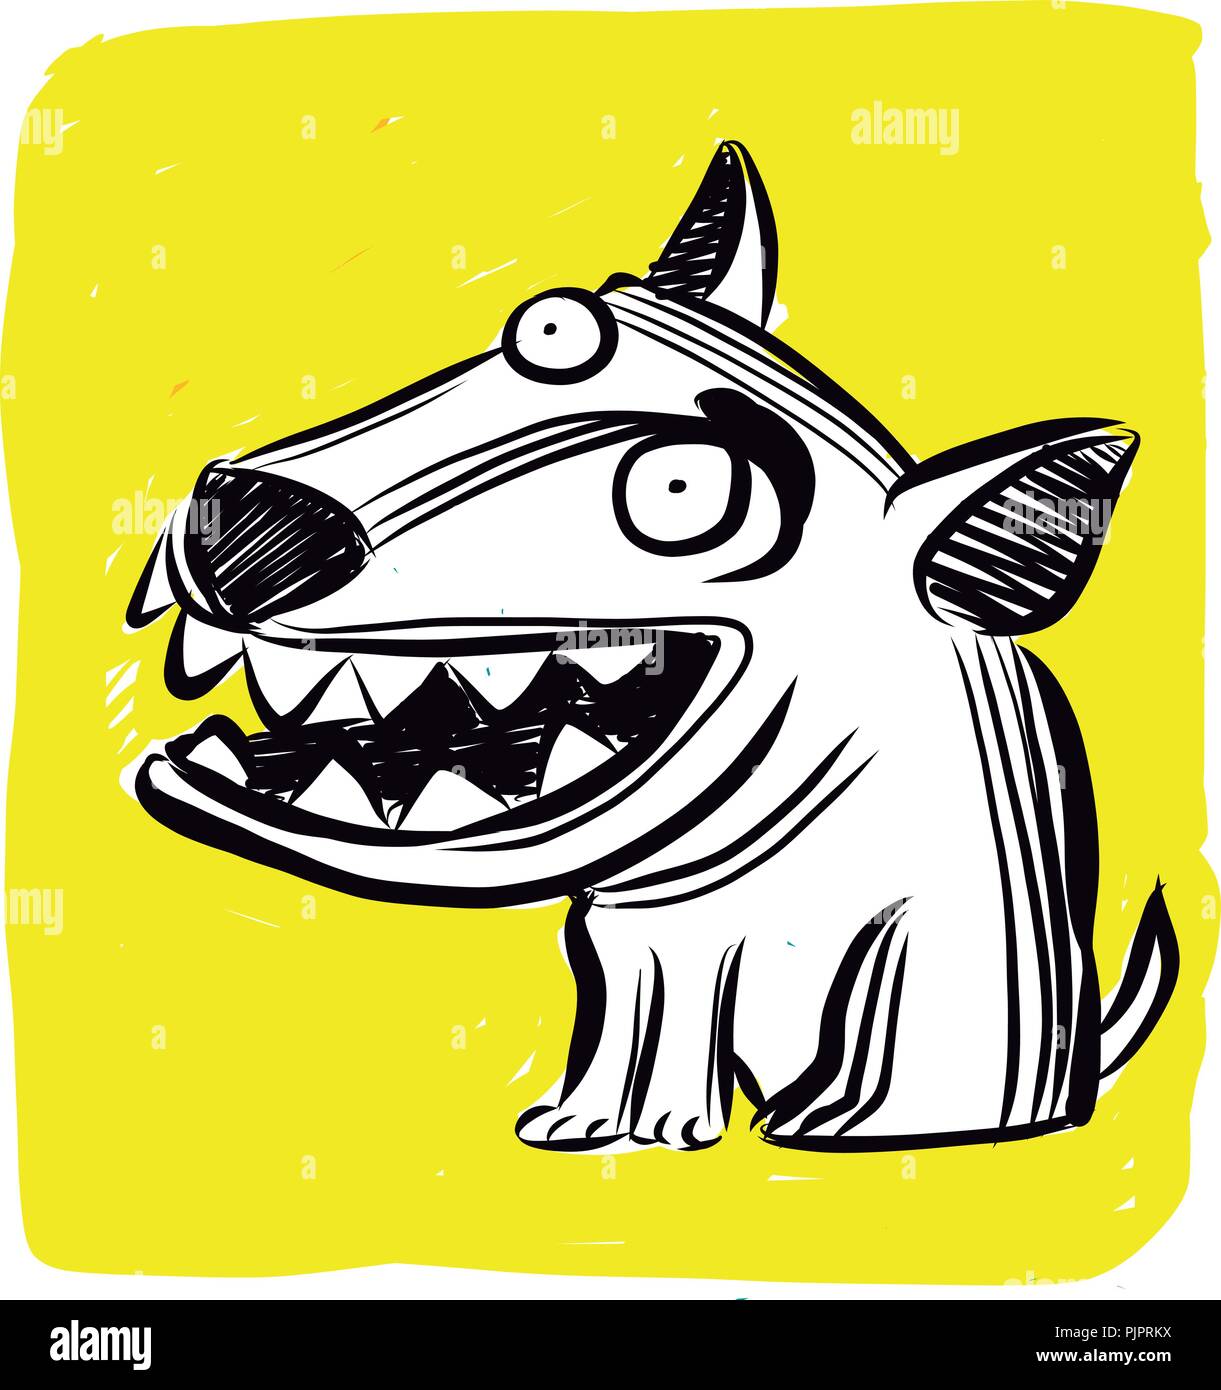 Hand drawn vector ink illustration or drawing of a funny cartoon dog with big teeth Stock Vector